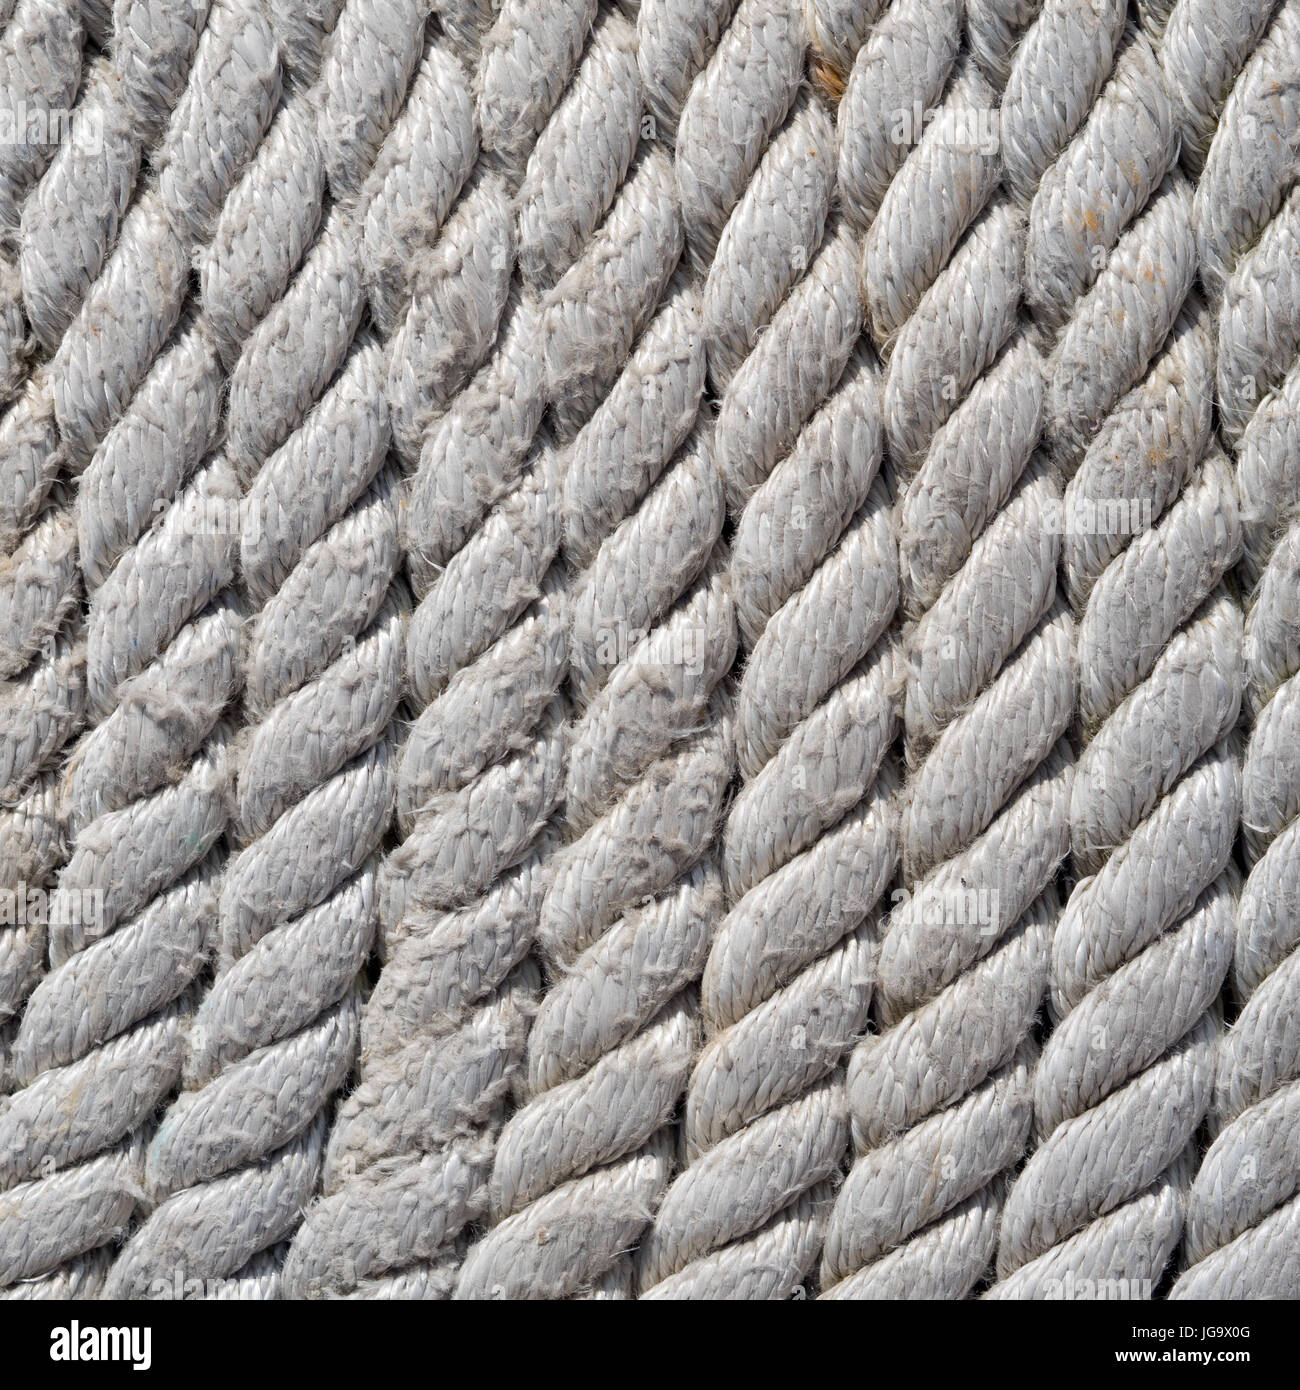 Tightly coiled fishing rope close up detail. Stock Photo